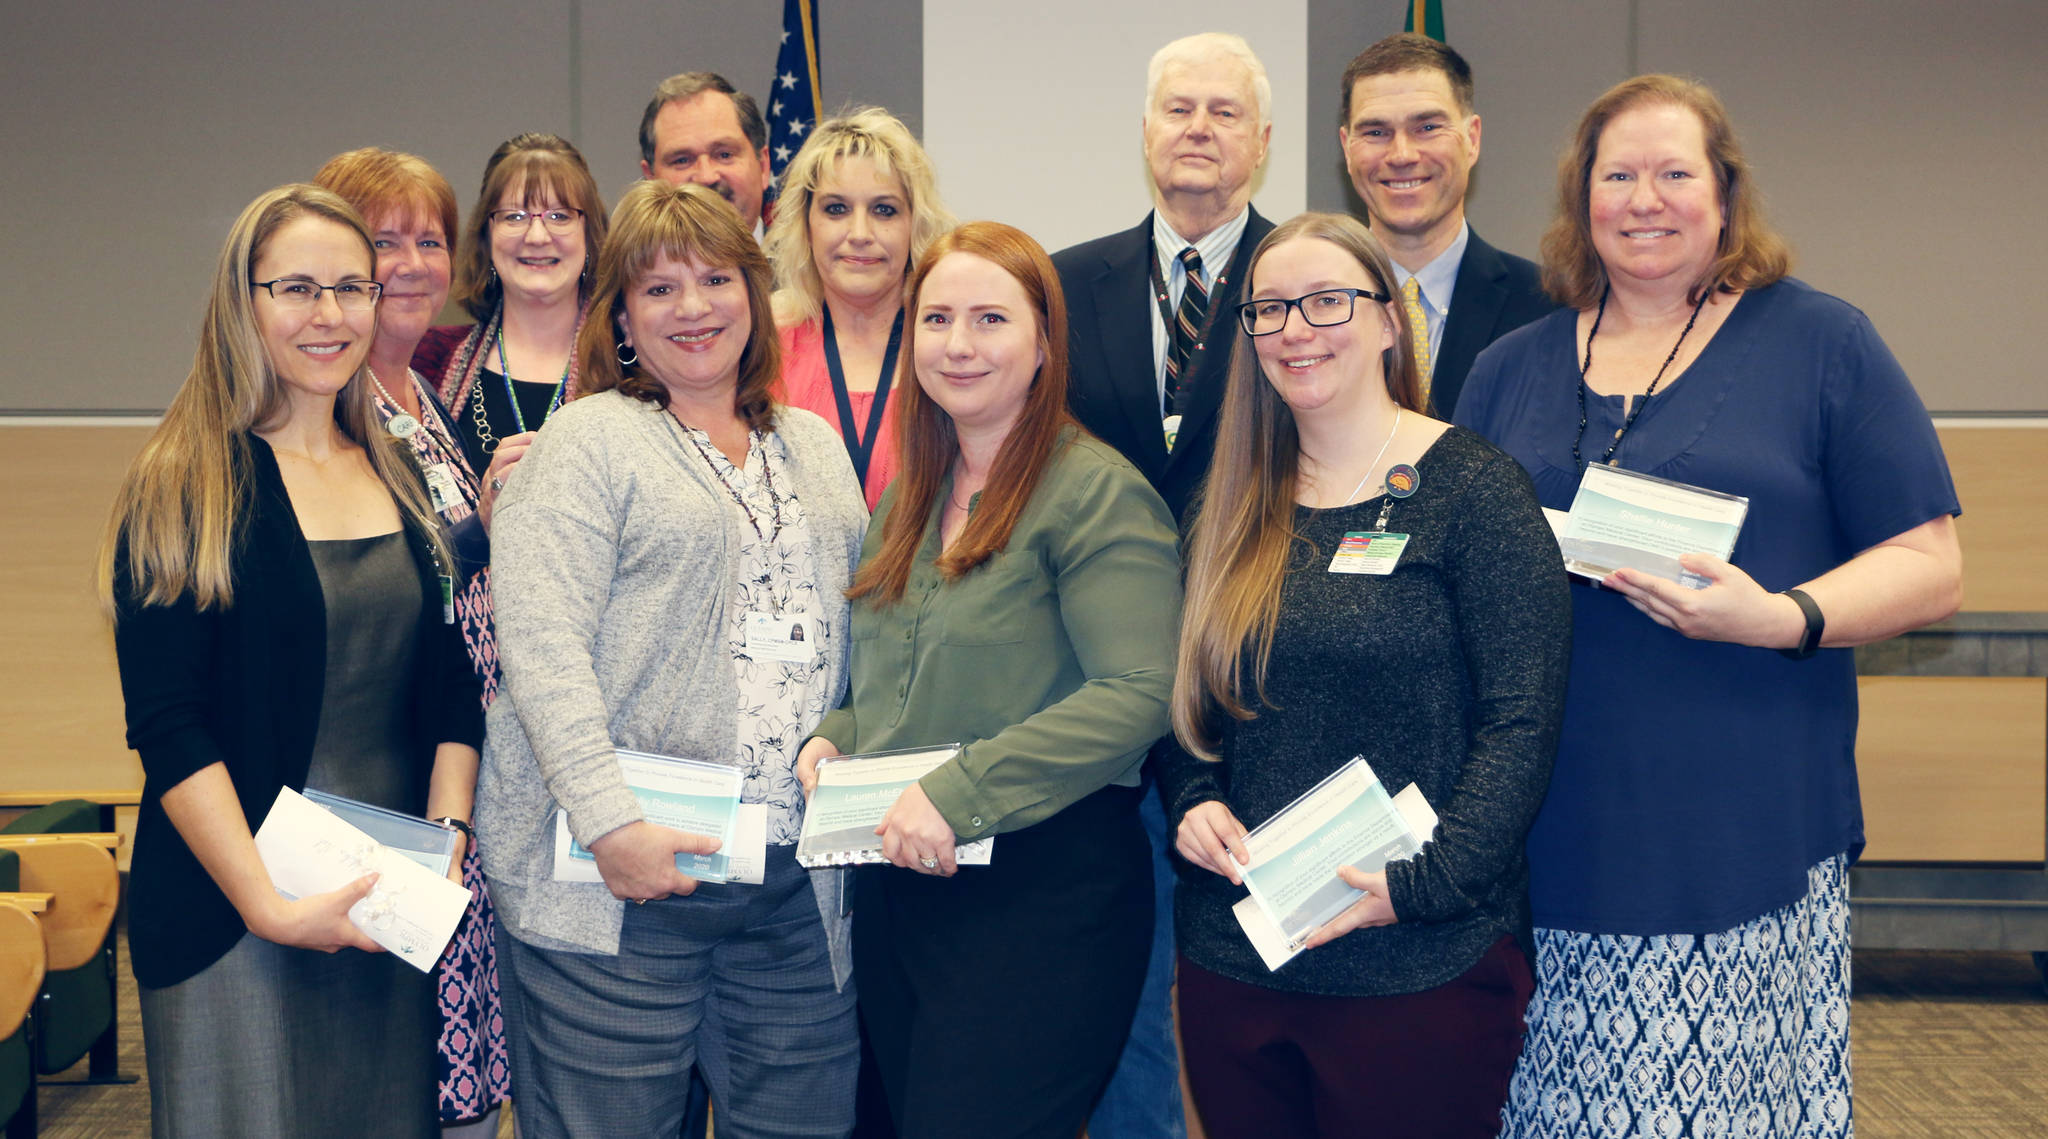 Pictured are (back row, from left) Rhonda Bowen (director, safety program and medical staff services), Stacy Remick, Chief Medical Officer Dr. Scott Kennedy, Marisa Bleck, OMC board president Jim Leskinovitch and Chief Operating Officer Darryl Wolfe, with (from row, from left) Mika Nel, Sally Rowland, Lauren McElwain, Jillian Jenkins and Shellie Hunter. Photo courtesy of Olympic Medical Center